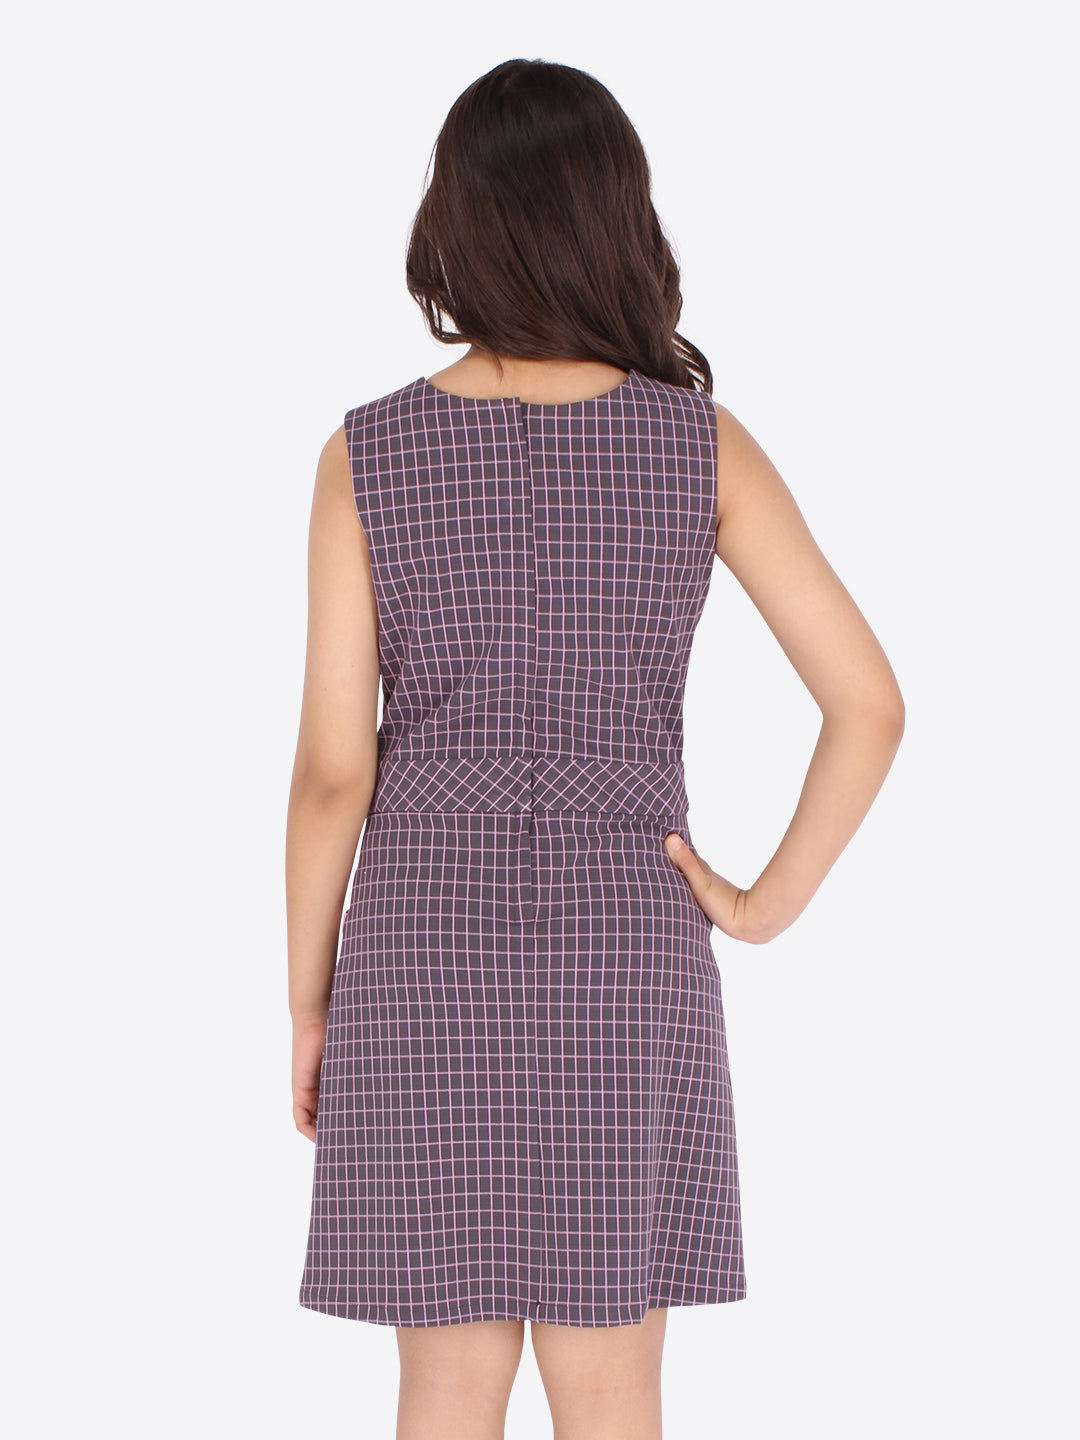 Smart Casual Checkered Dress For Girls